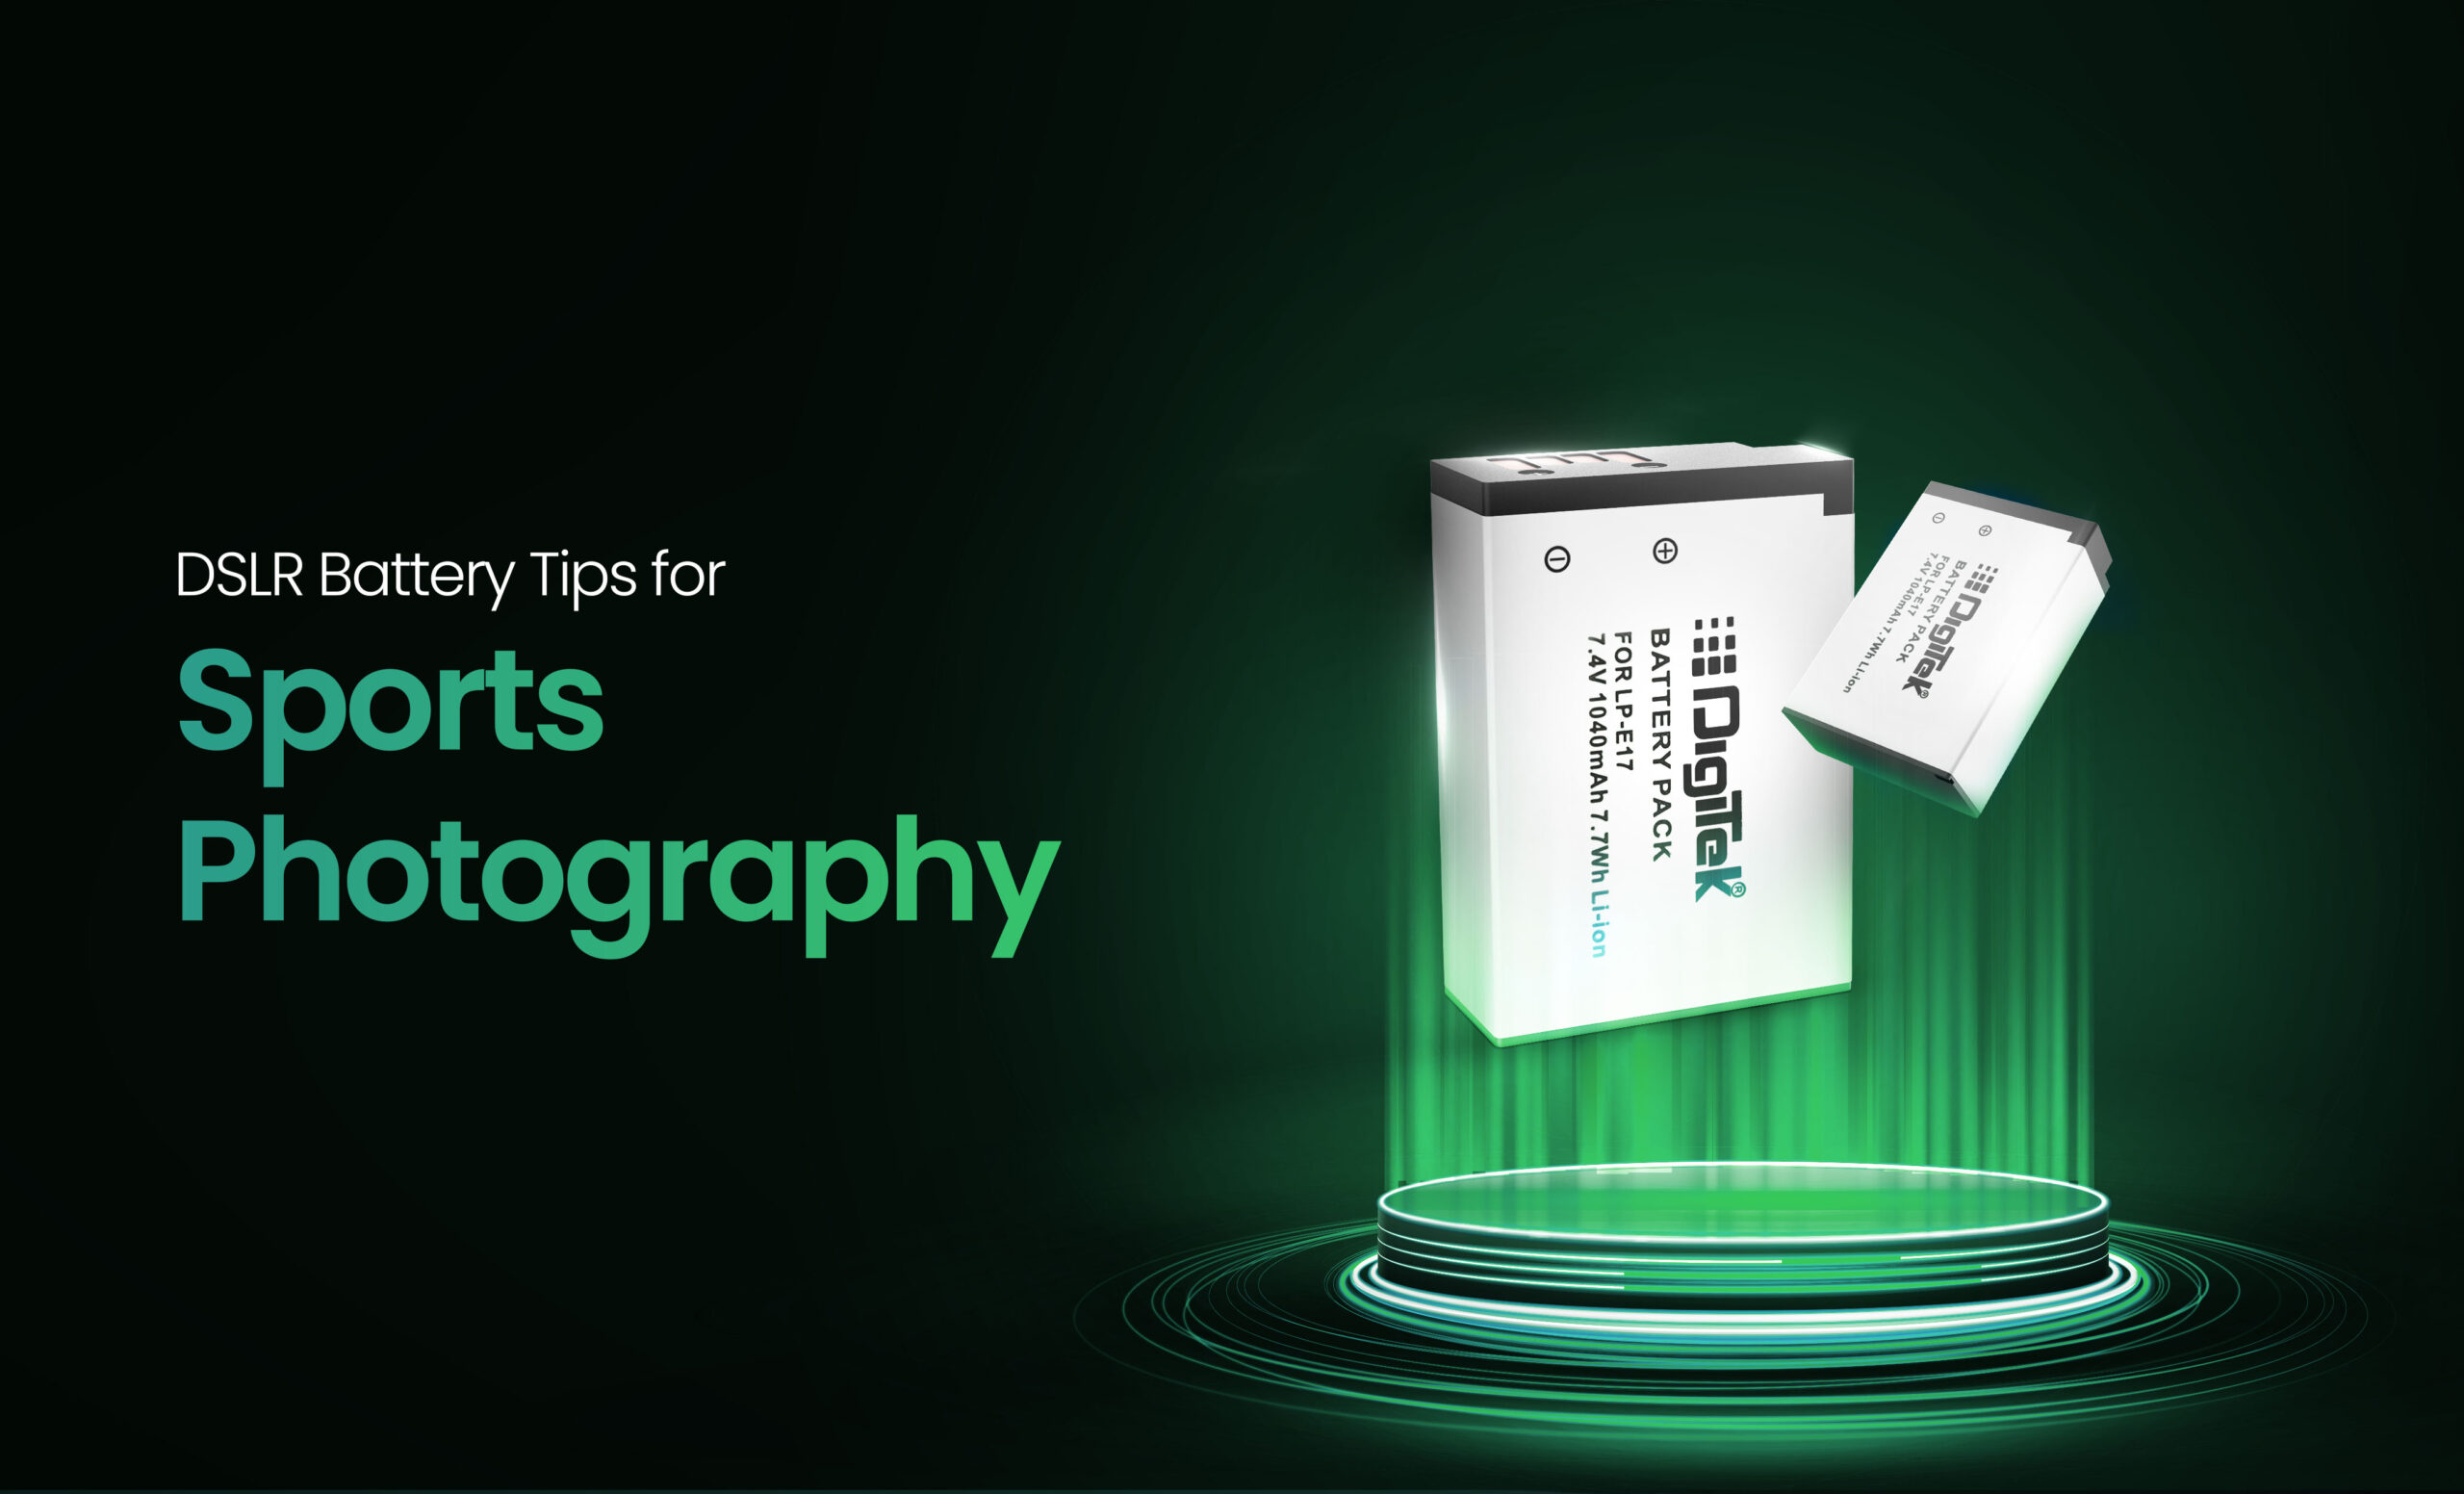 DSLR Battery Tips for Sports Photography